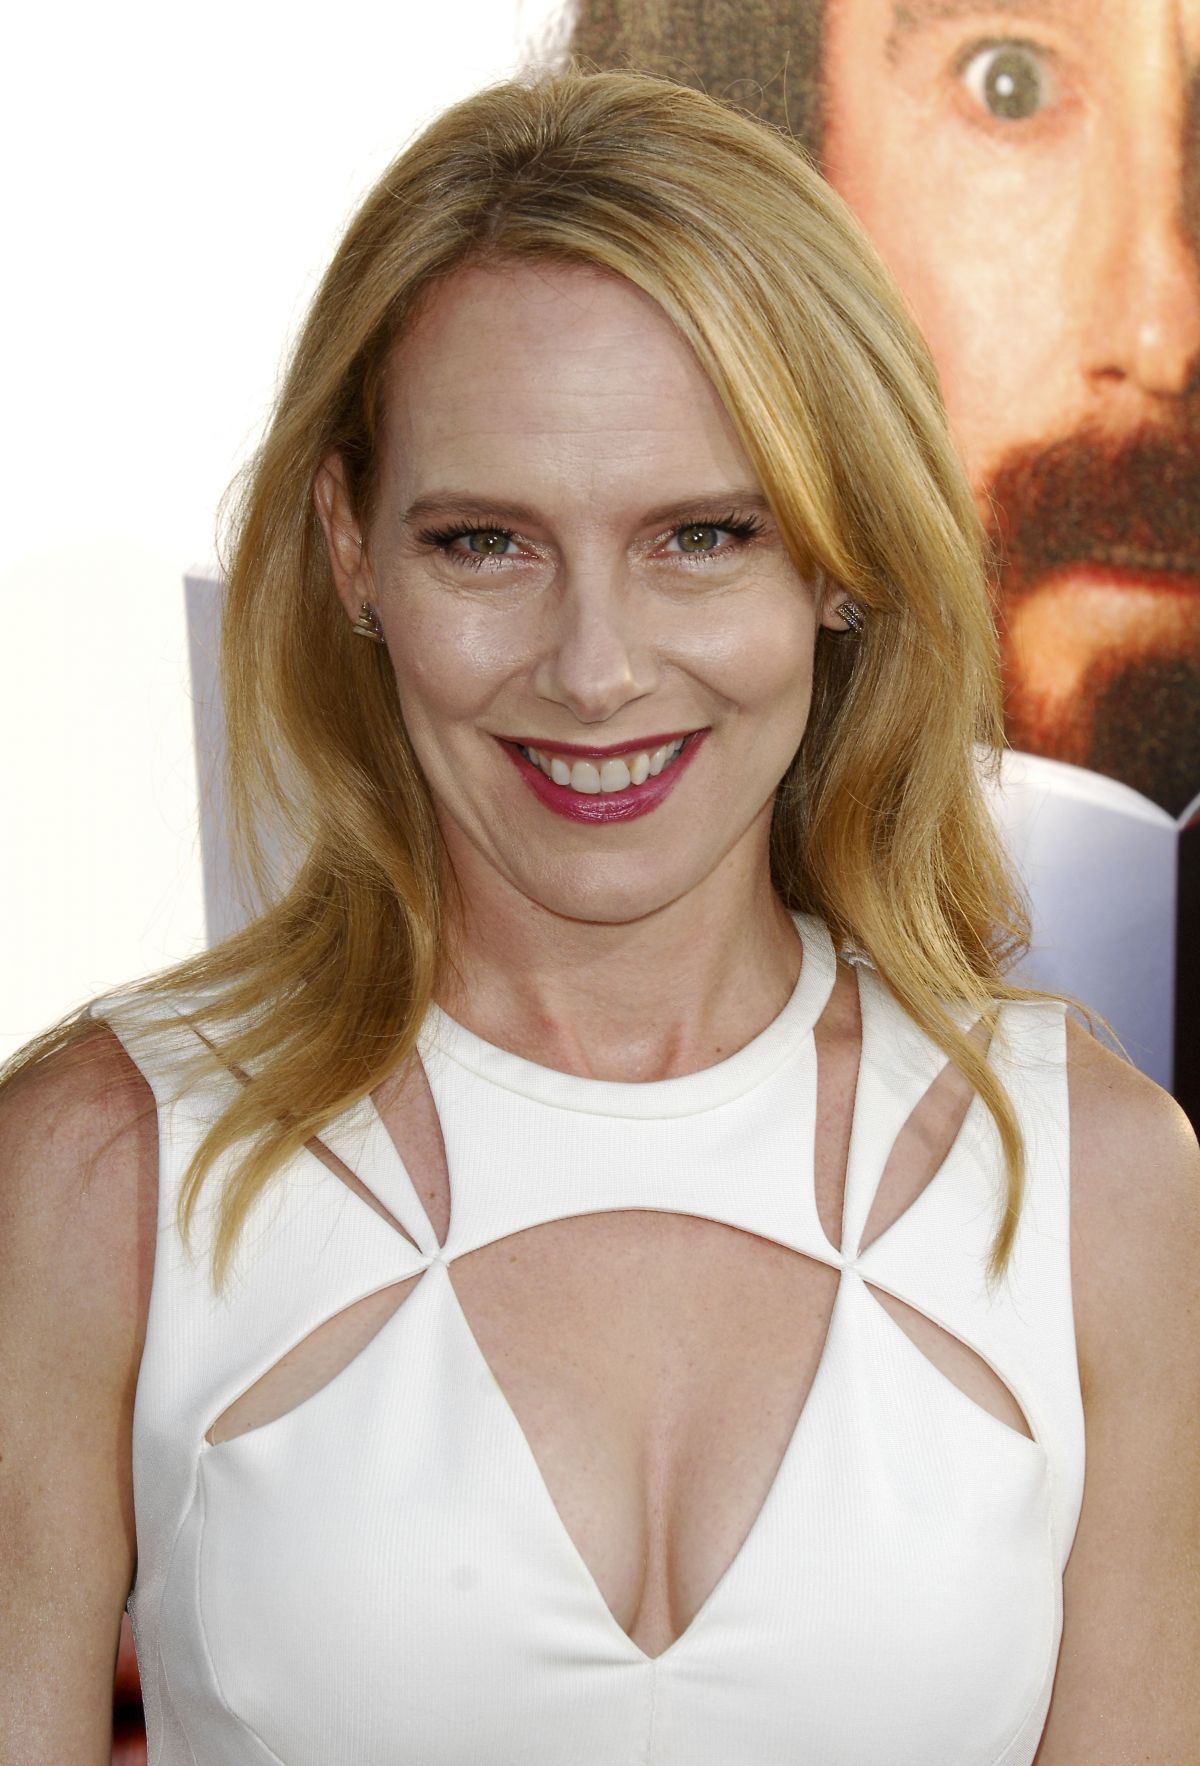 Pictures of Amy Ryan, Picture #299103 - Pictures Of Celebrities1200 x 1766